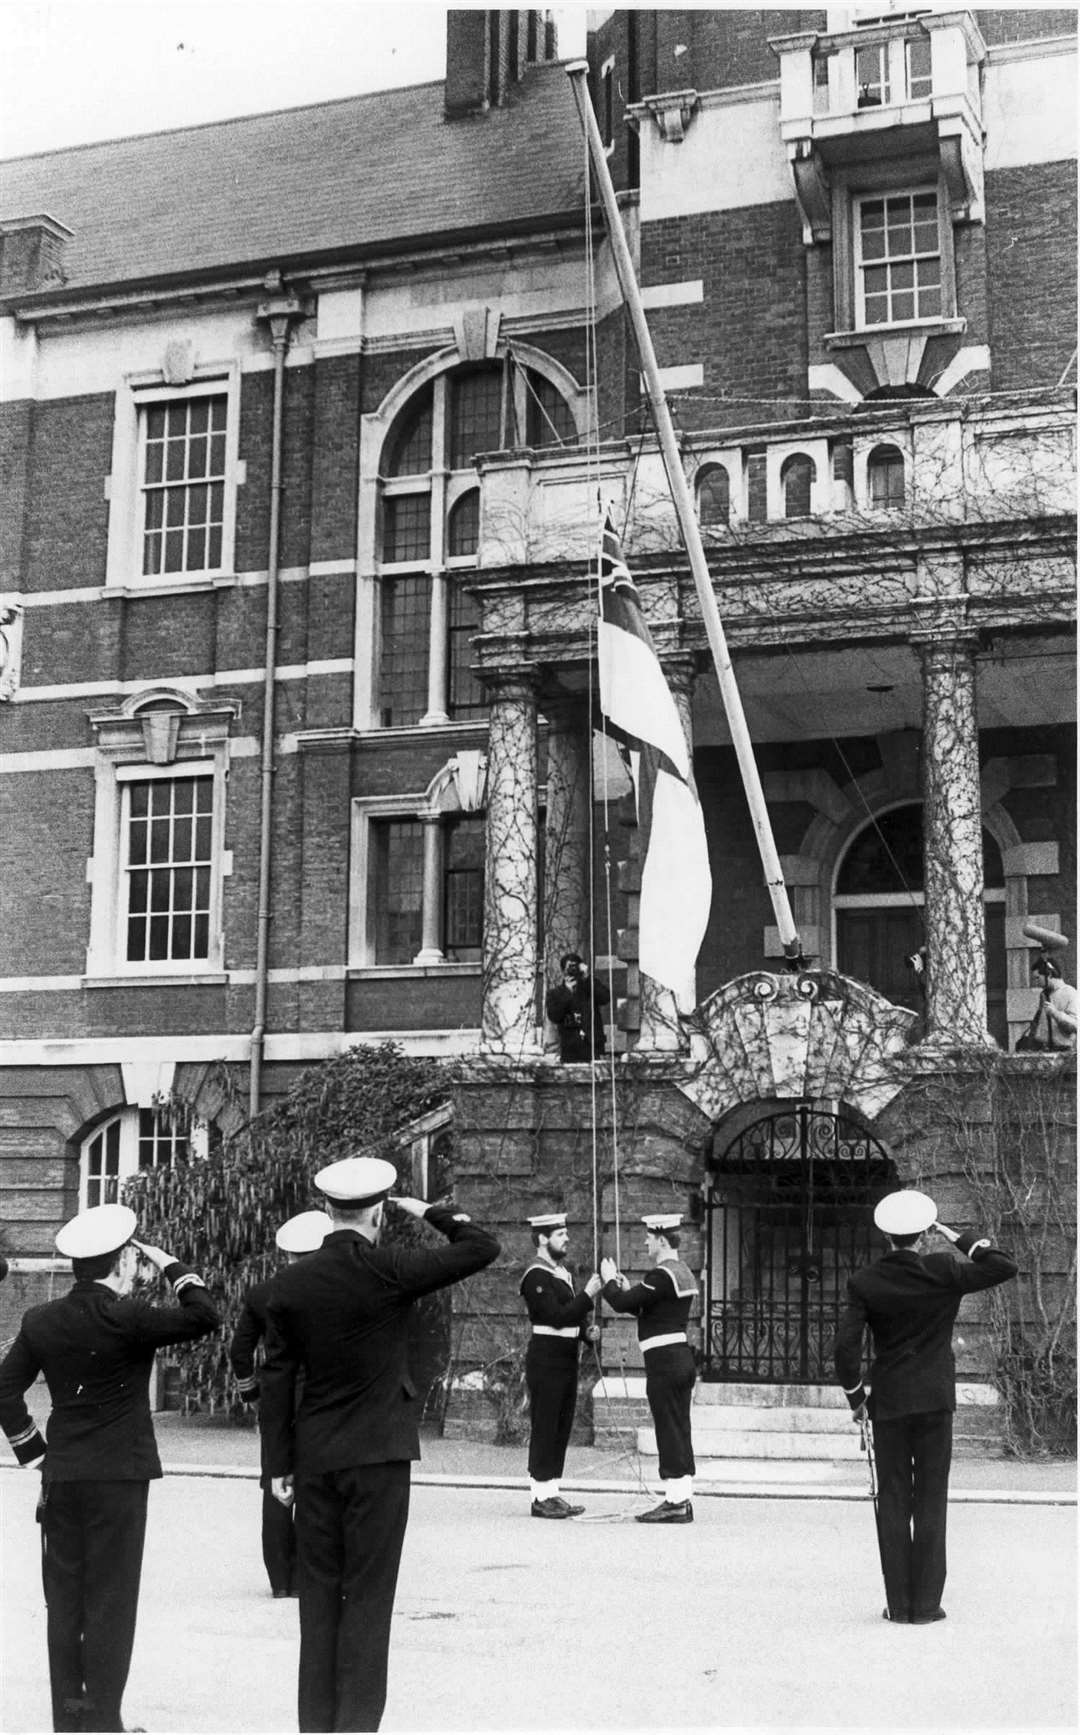 History was made in Chatham on February 17, 1984, when the white ensign was lowered for the last time at HMS Pembroke, breaking the town's 437-year link with the Royal Navy